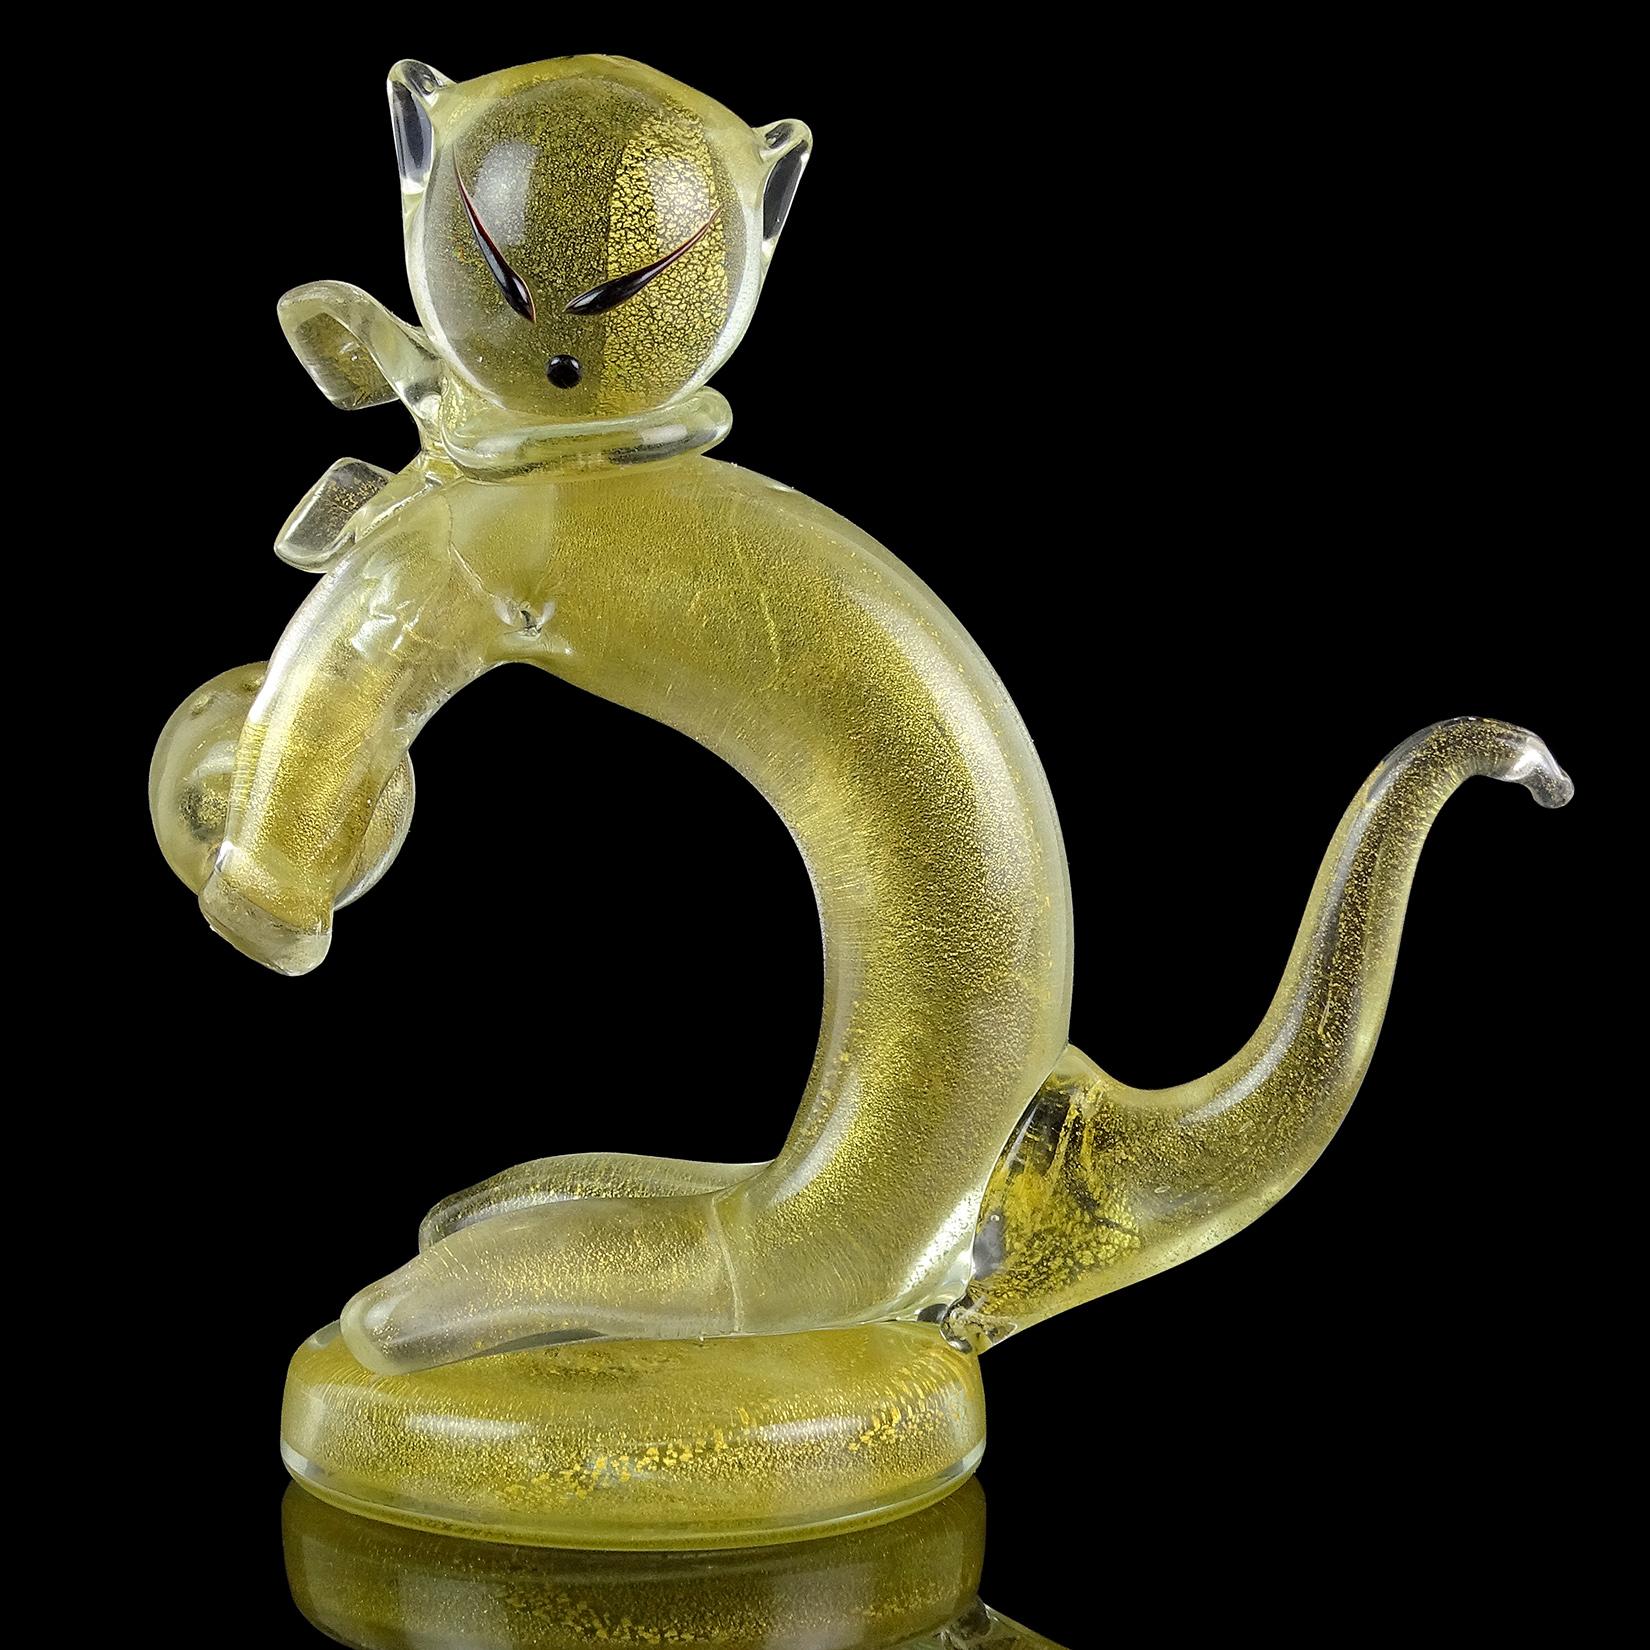 Super cute and rare, vintage Murano hand blown gold flecks Italian art glass kitty cat figurine / sculpture. Attributed to designer Alfredo Barbini. The piece is very unusual, with a kitten playing with a ball. It has black accents on his face for